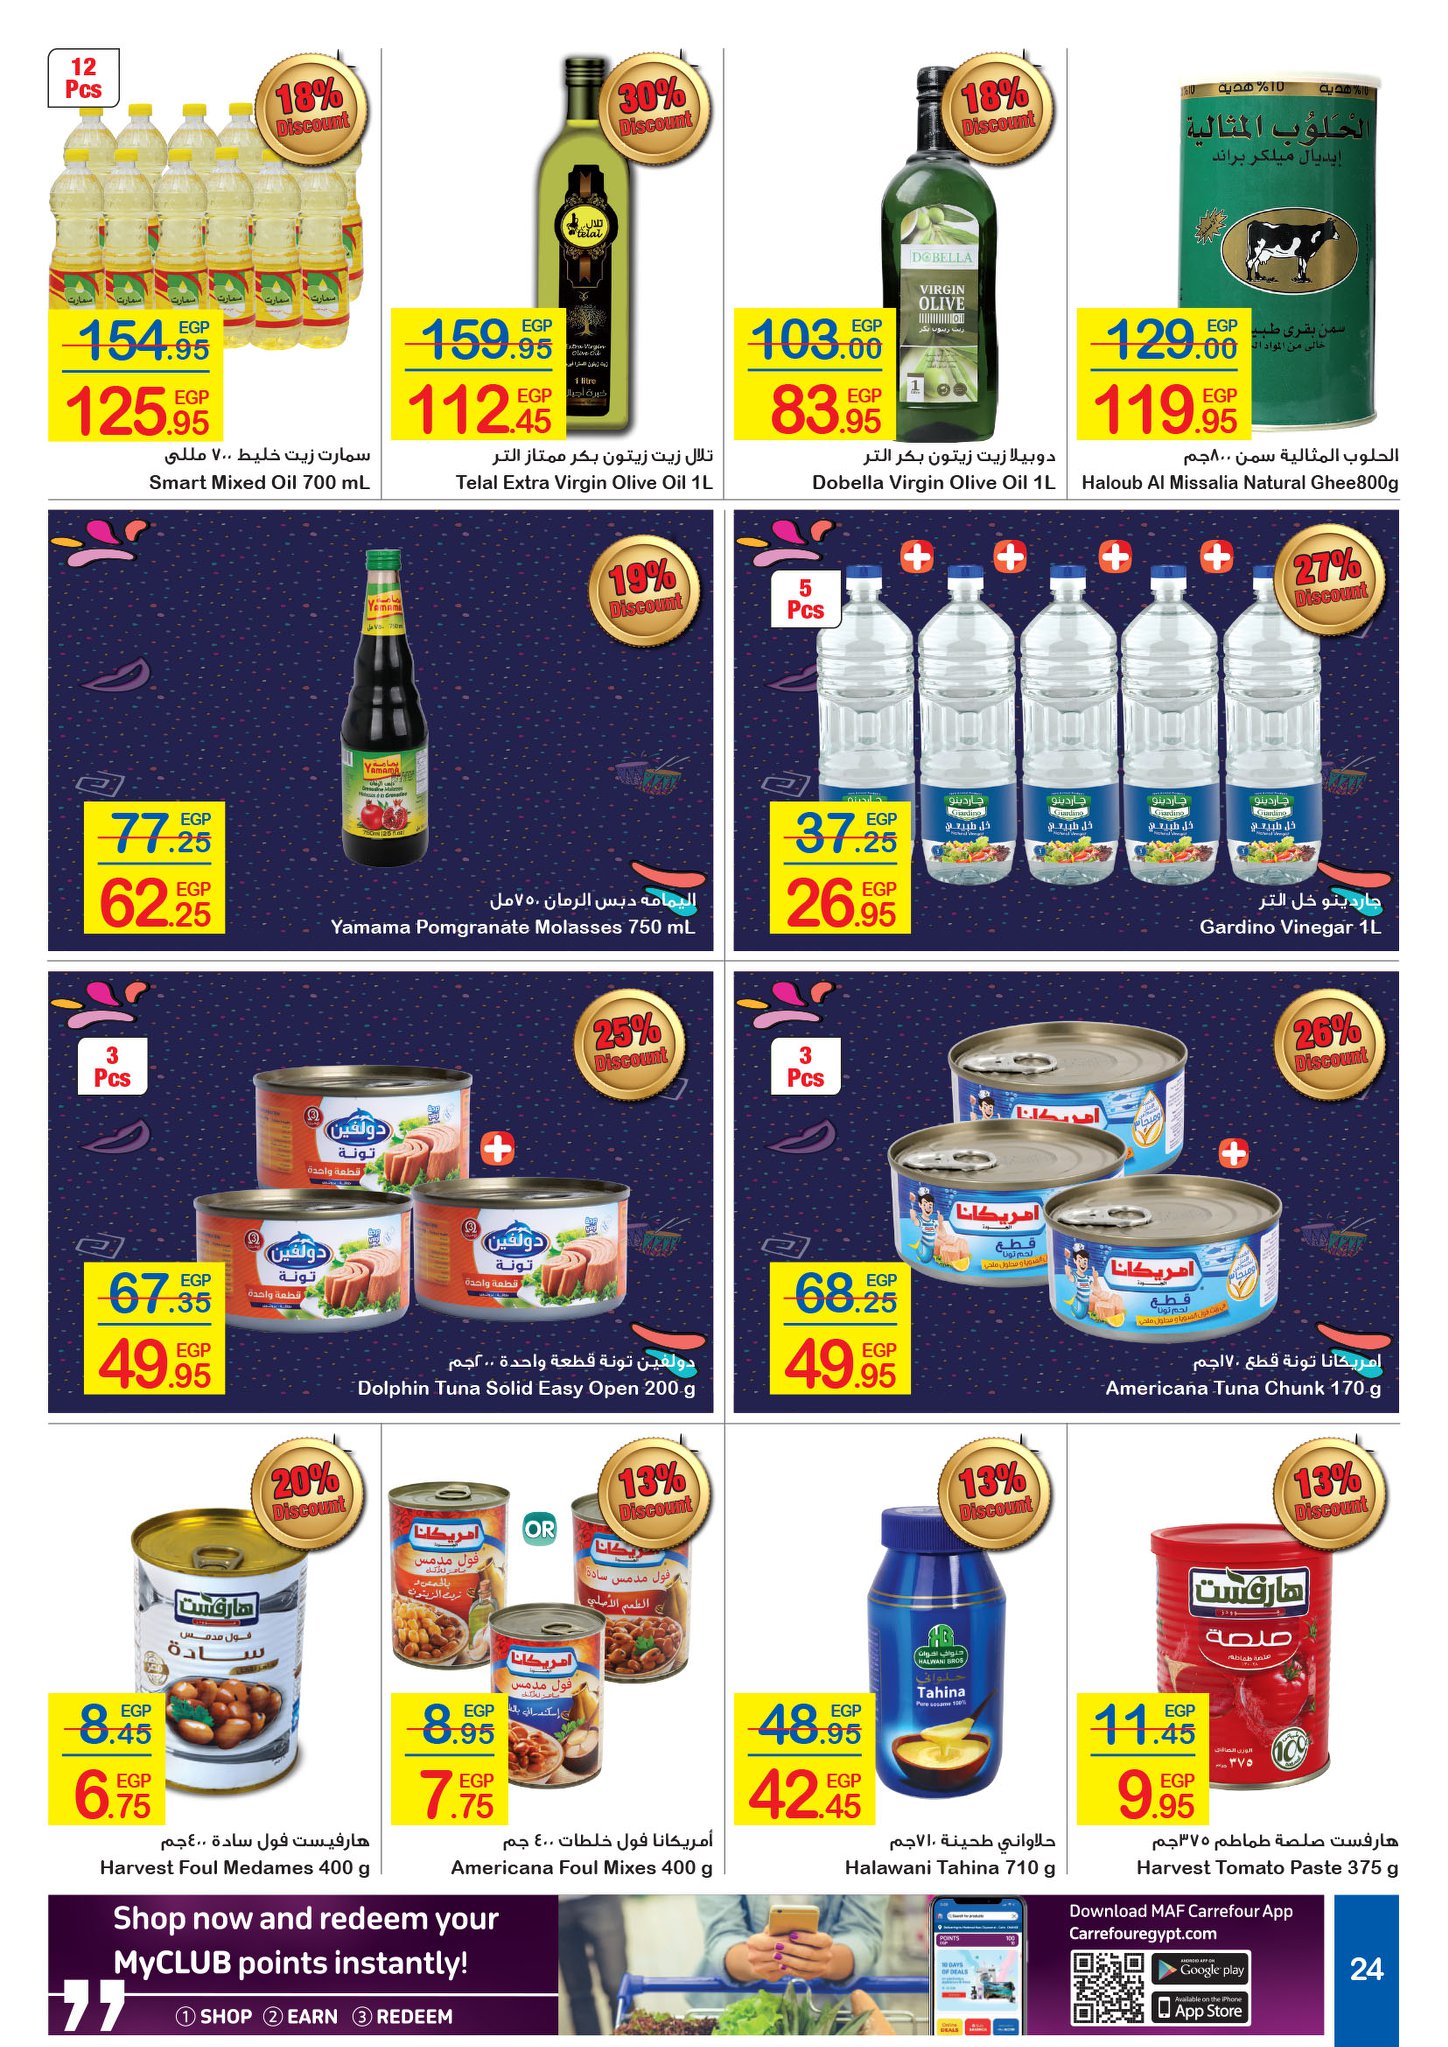 Carrefour Flyer from 16/7 till 27/7 | Carrefour Egypt 24